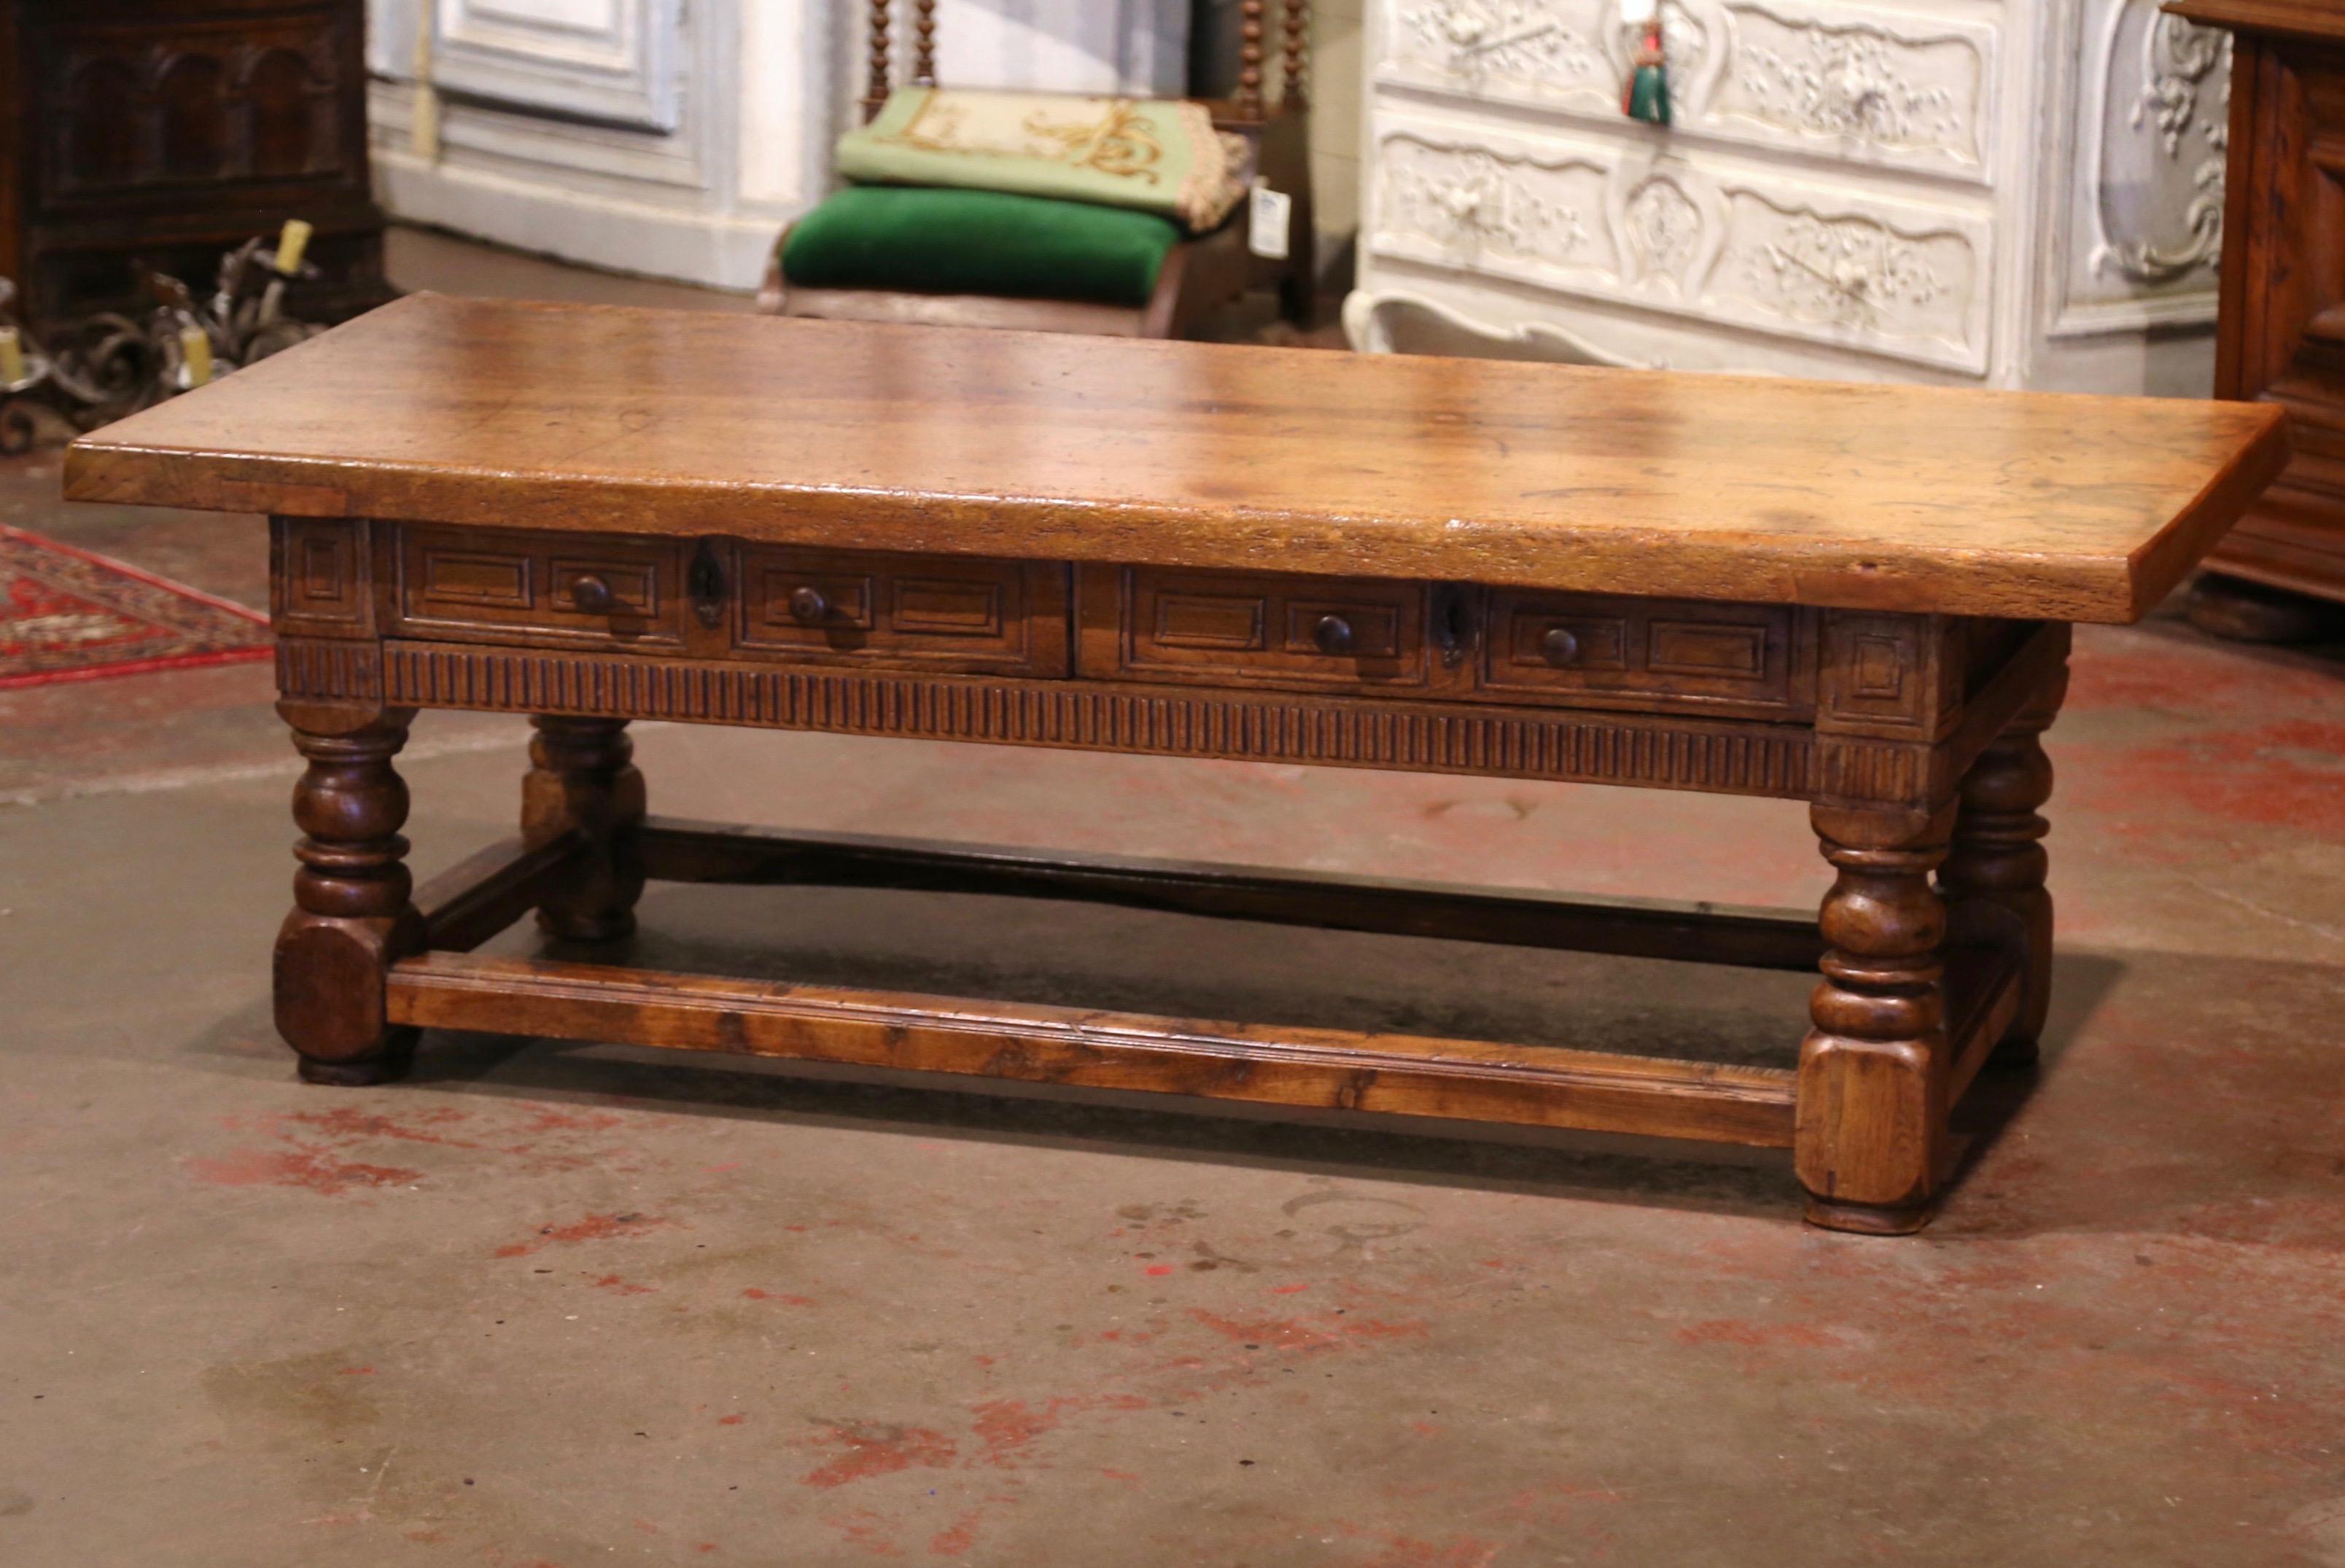 18th century coffee table